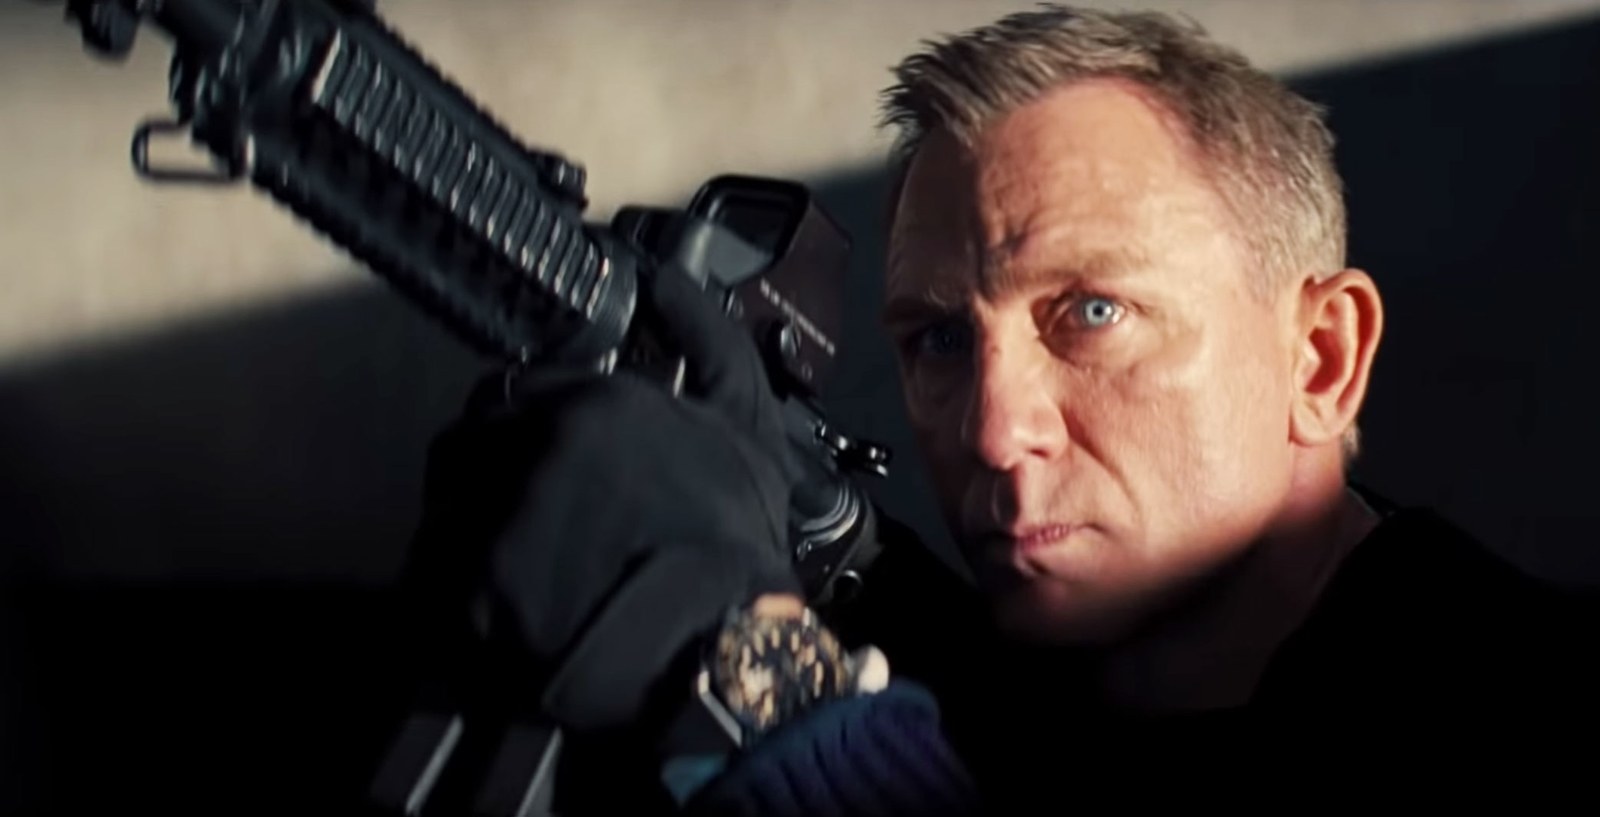 https://s1.cdn.autoevolution.com/images/news/gallery/daniel-craig-helped-design-the-omega-watch-james-bond-wears-in-no-time-to-die_1.jpg